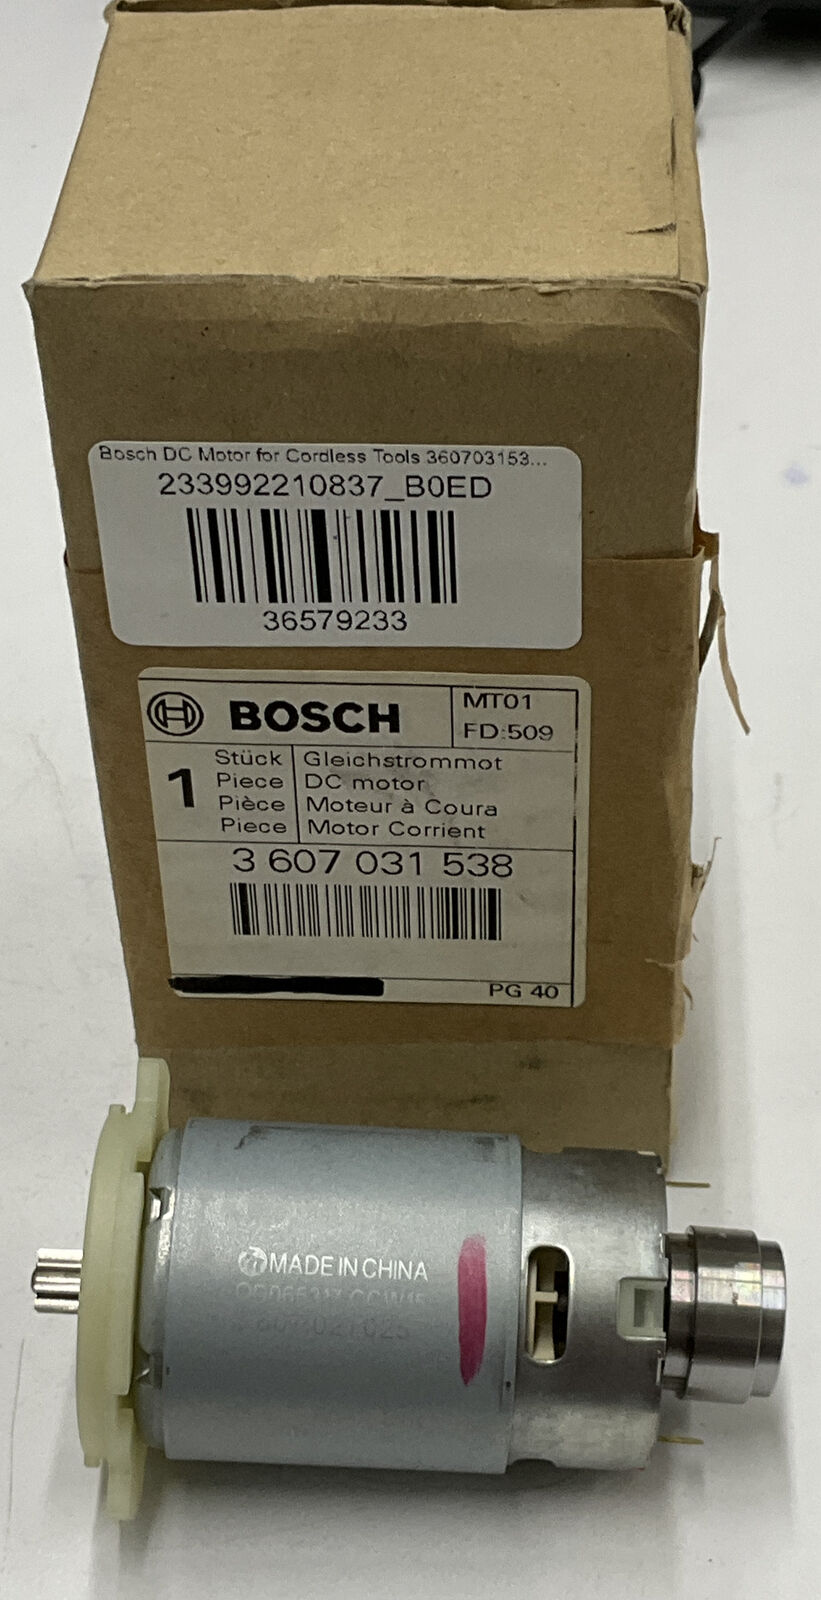 Bosch DC Motor for Cordless Tools 3607031538 3-607-031-538 (BL173) - 0